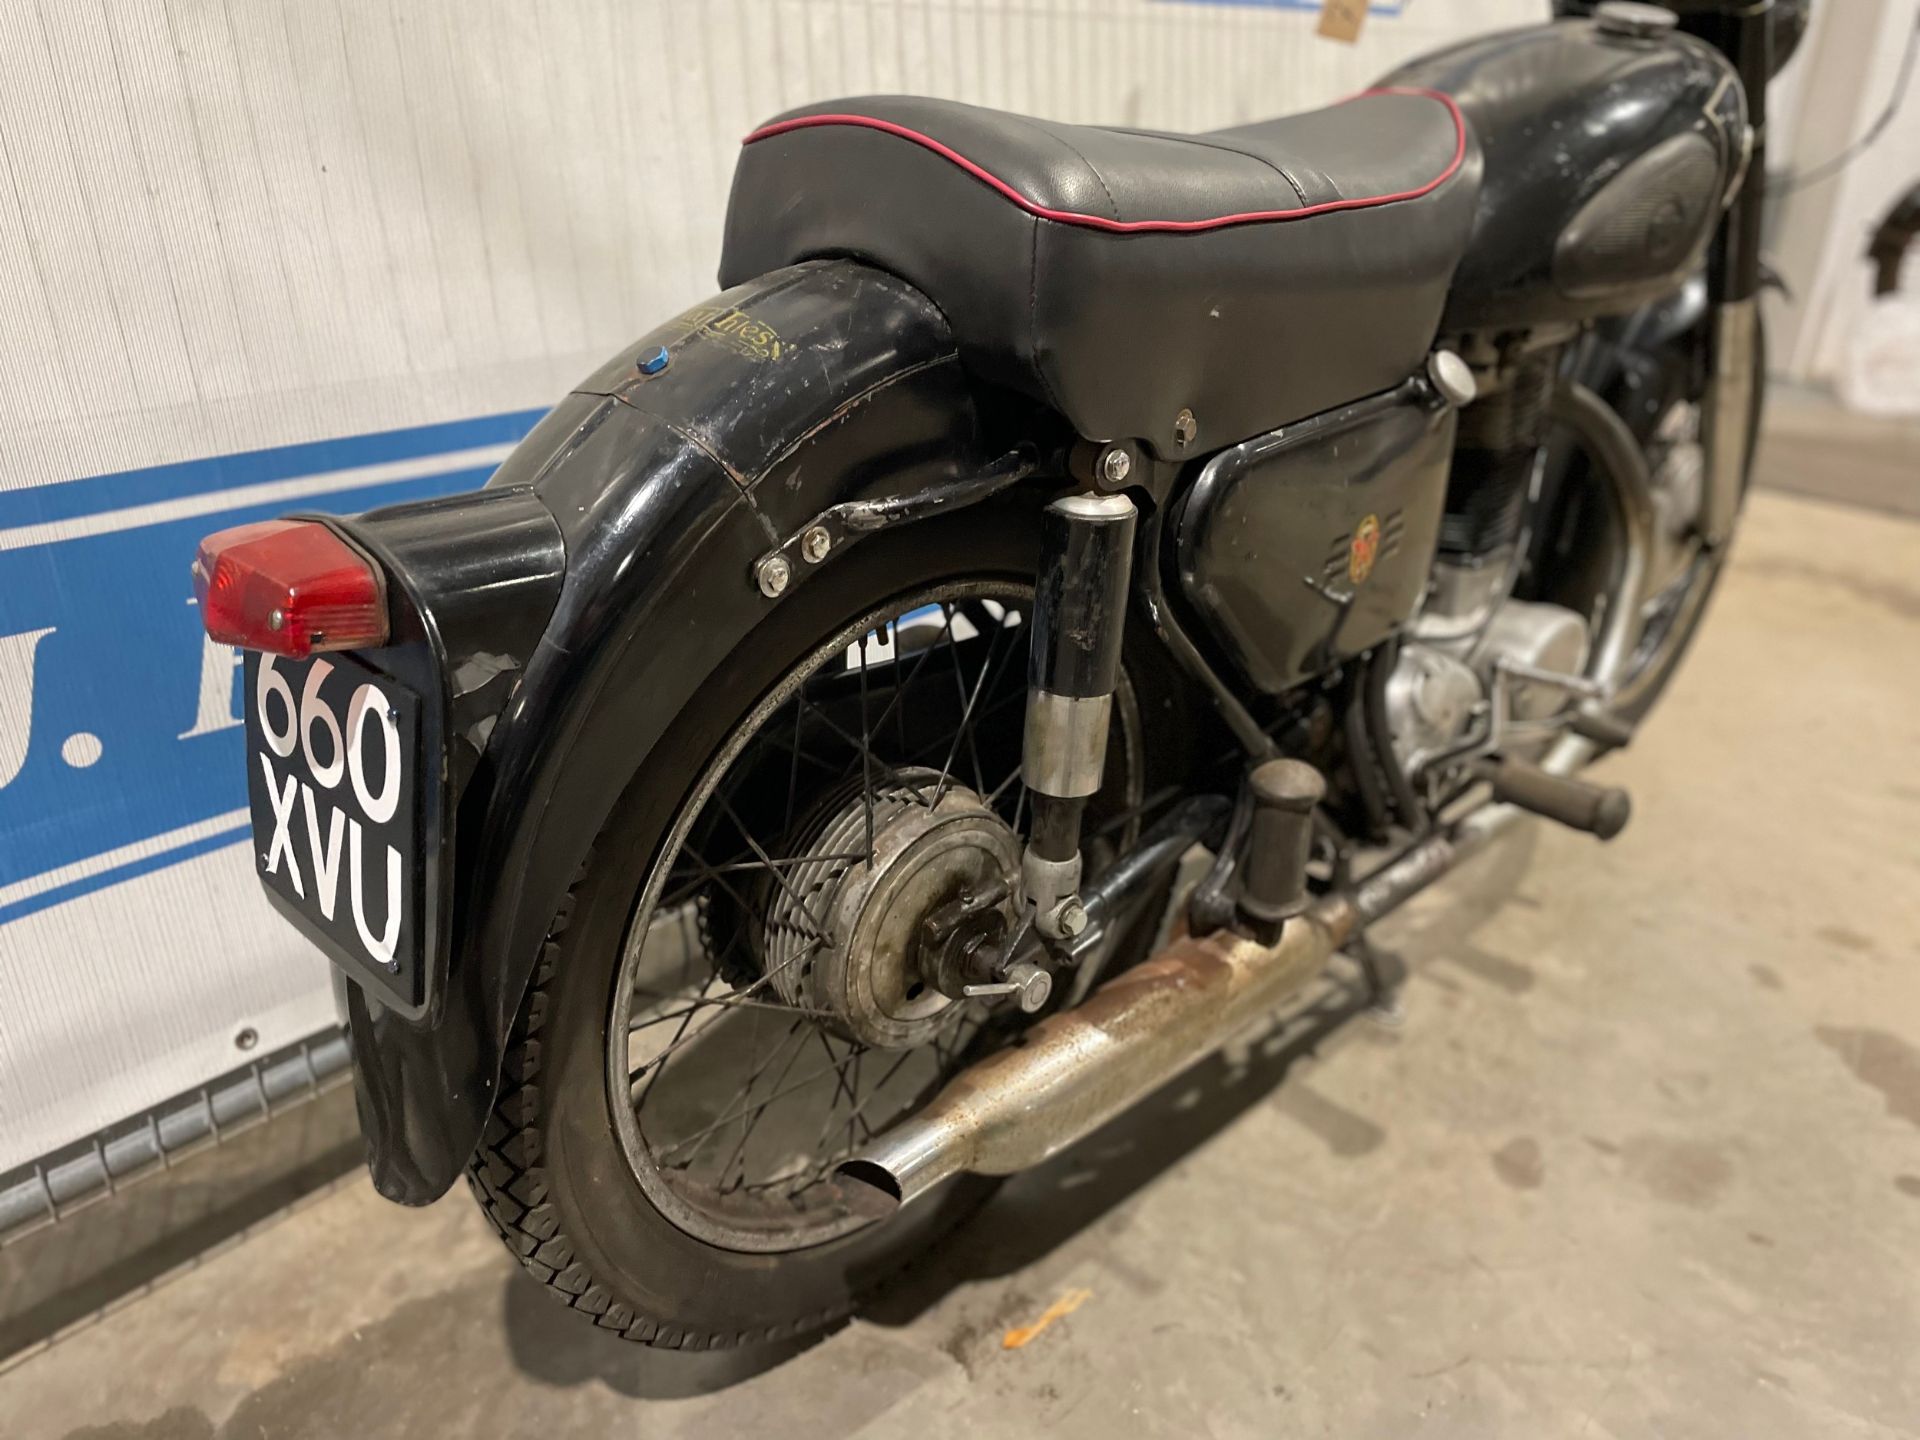 Matchless G3 motorcycle. 1958. 348cc. Has run recently but needs a new clutch. Reg 660 XVU. V5 - Image 6 of 12